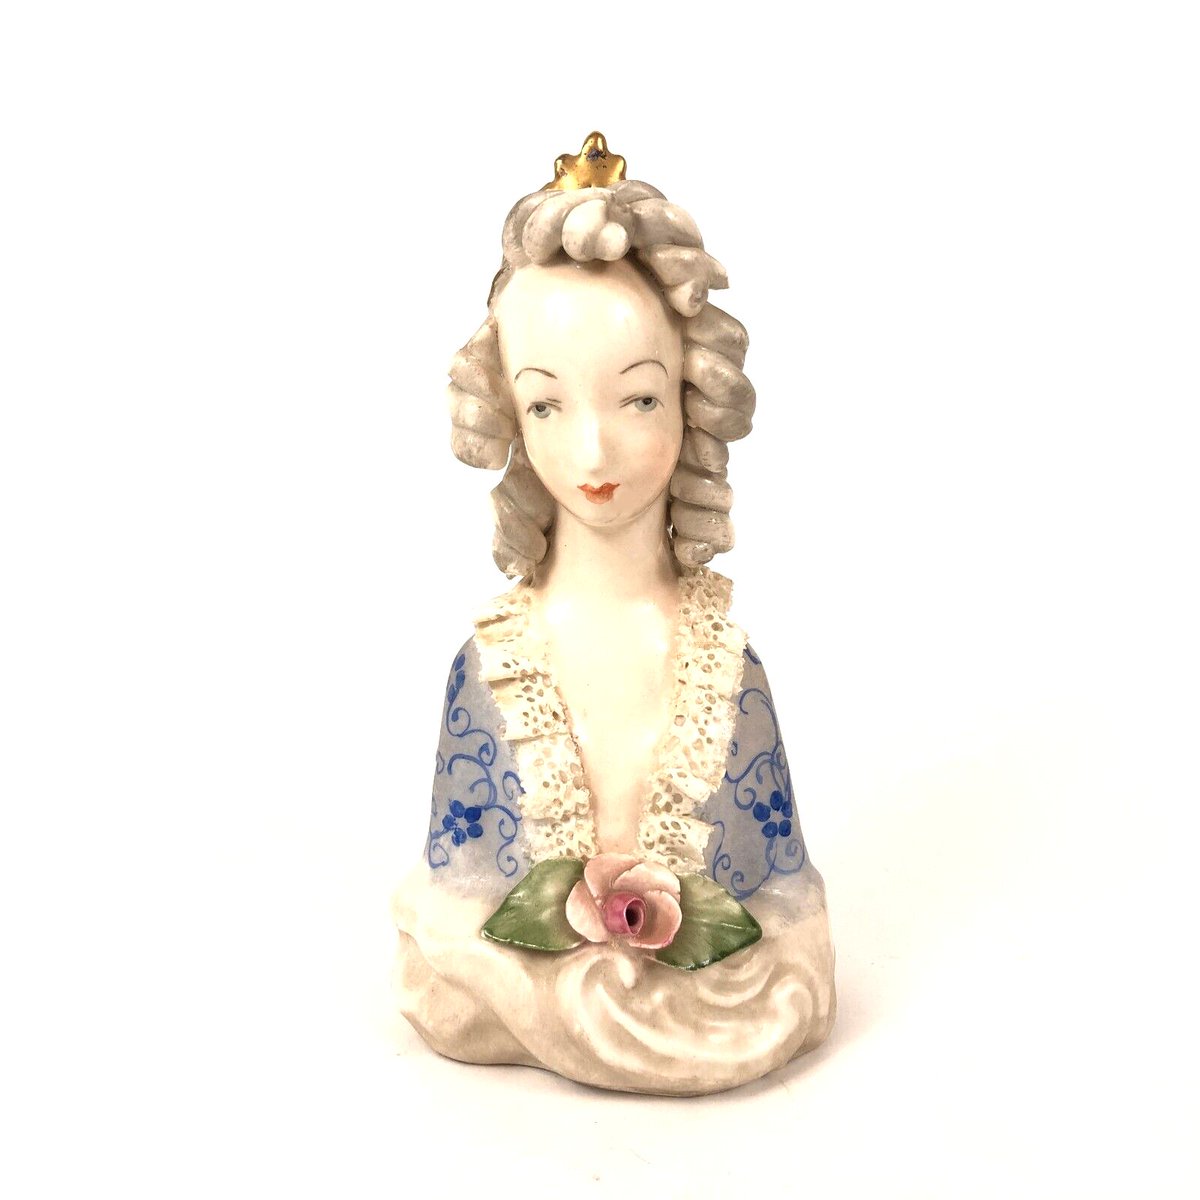 Check out Cordey 1940's Vintage Porcelain Hand Painted Lady Figure Lace Flower Tiara 6.75' ebay.com/itm/4041147605…

#cordeyporcelain #porcelainlady #1940sporcelain #vintageporcelain #porcelainfigurine #roguesestatejewelry